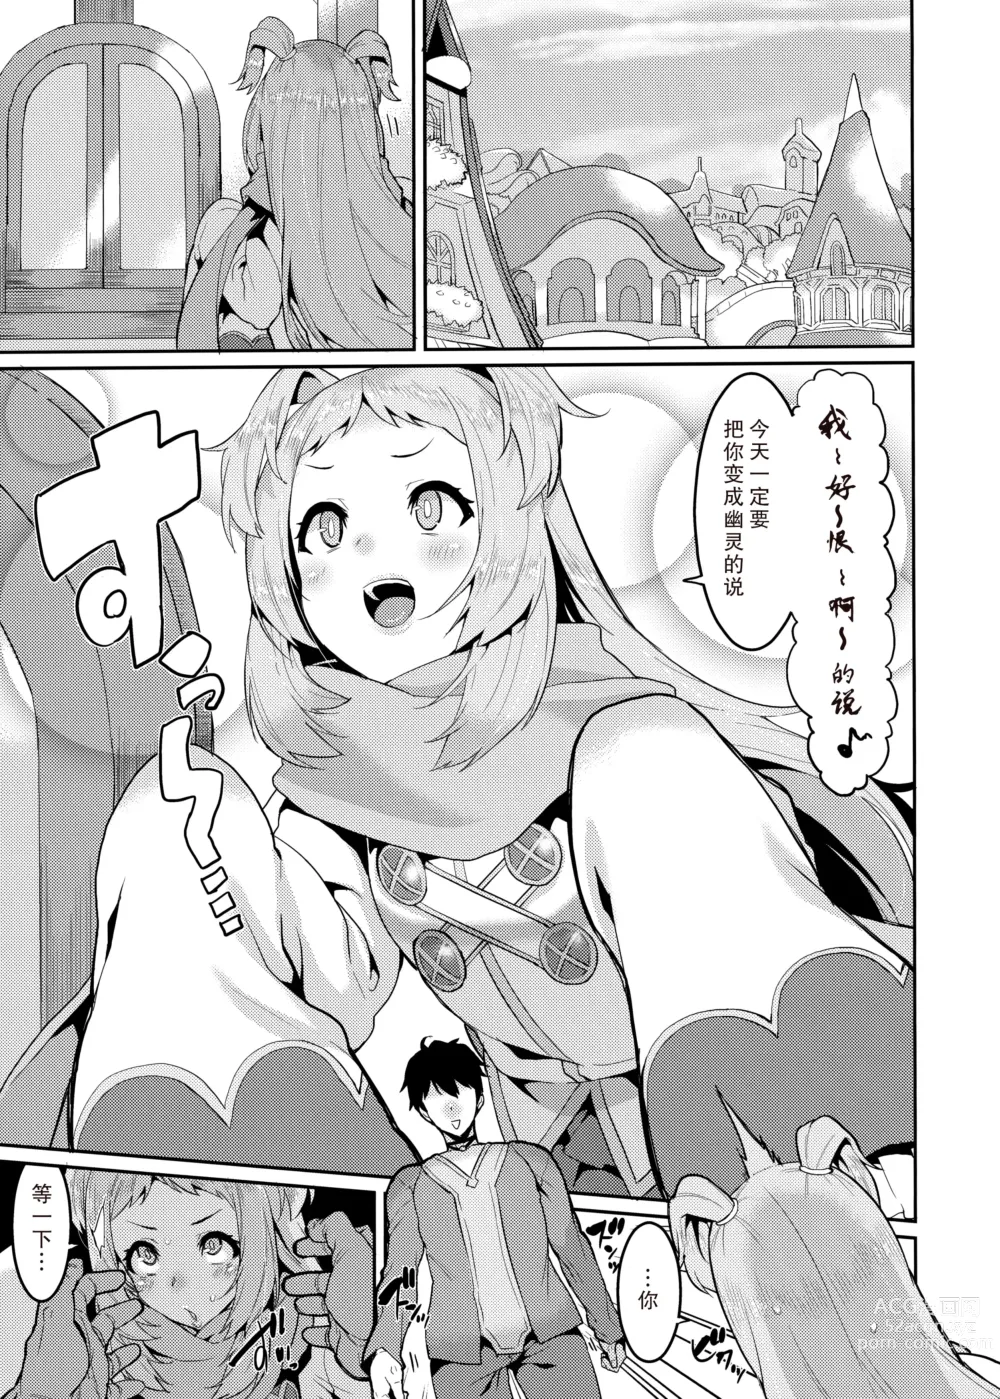 Page 5 of doujinshi Pudding Switch (decensored)